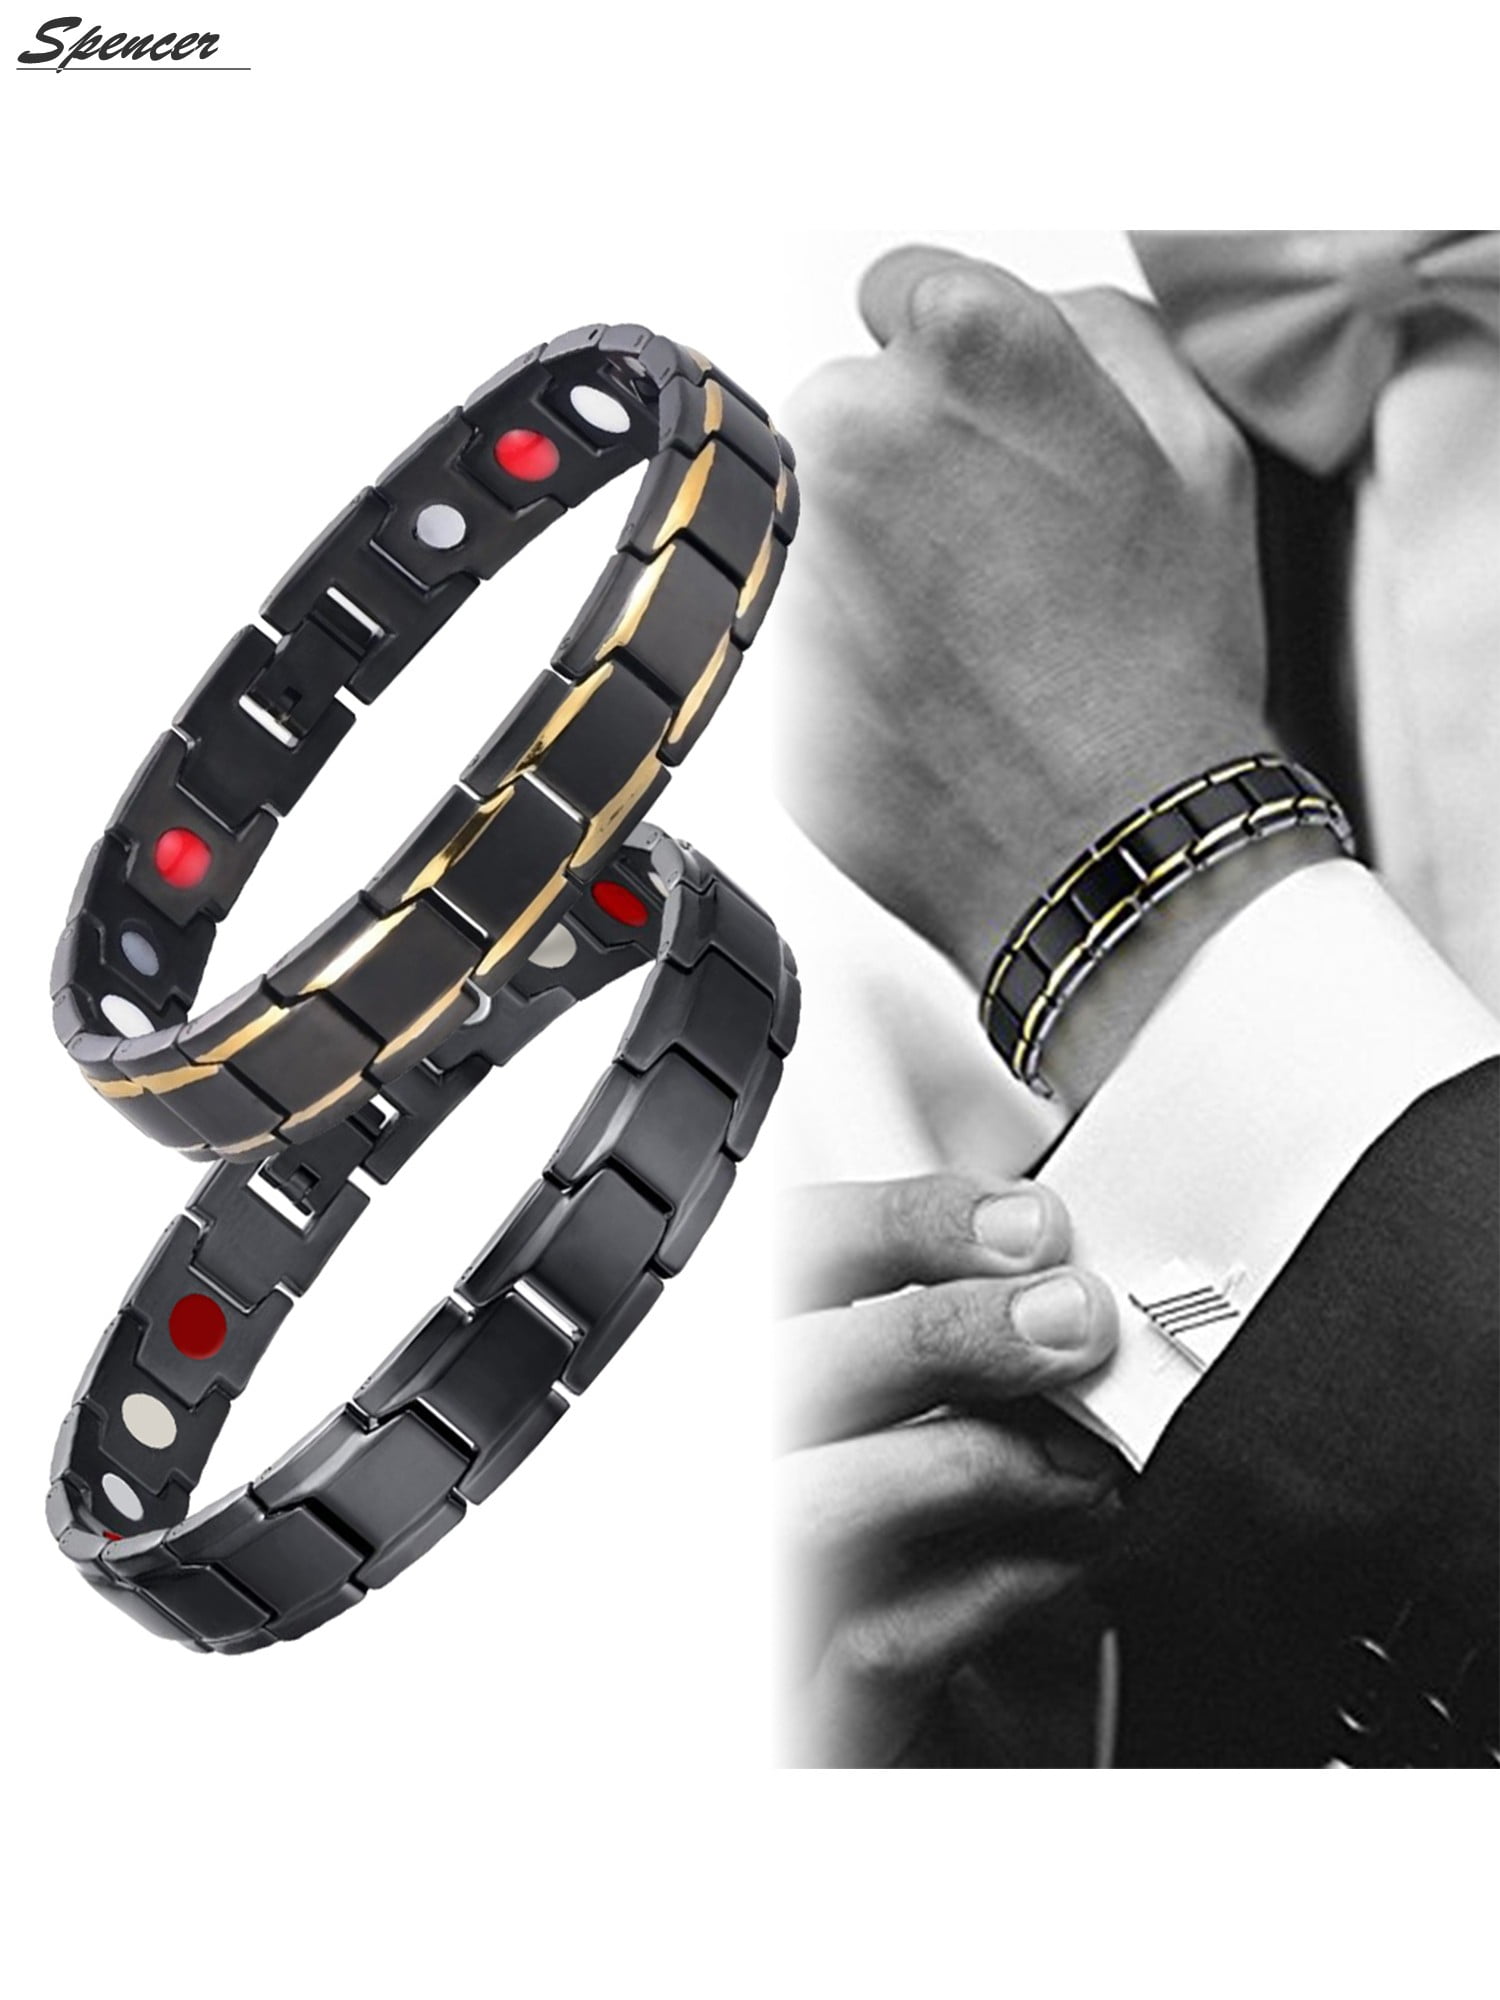 Spencer - Spencer Fashion Titanium Magnetic Therapy Bracelet for Men Women Energy Health Care Bracelet Pain Relief for Arthritis and Carpal Tunnel &quot;Black&amp;Gold&quot;